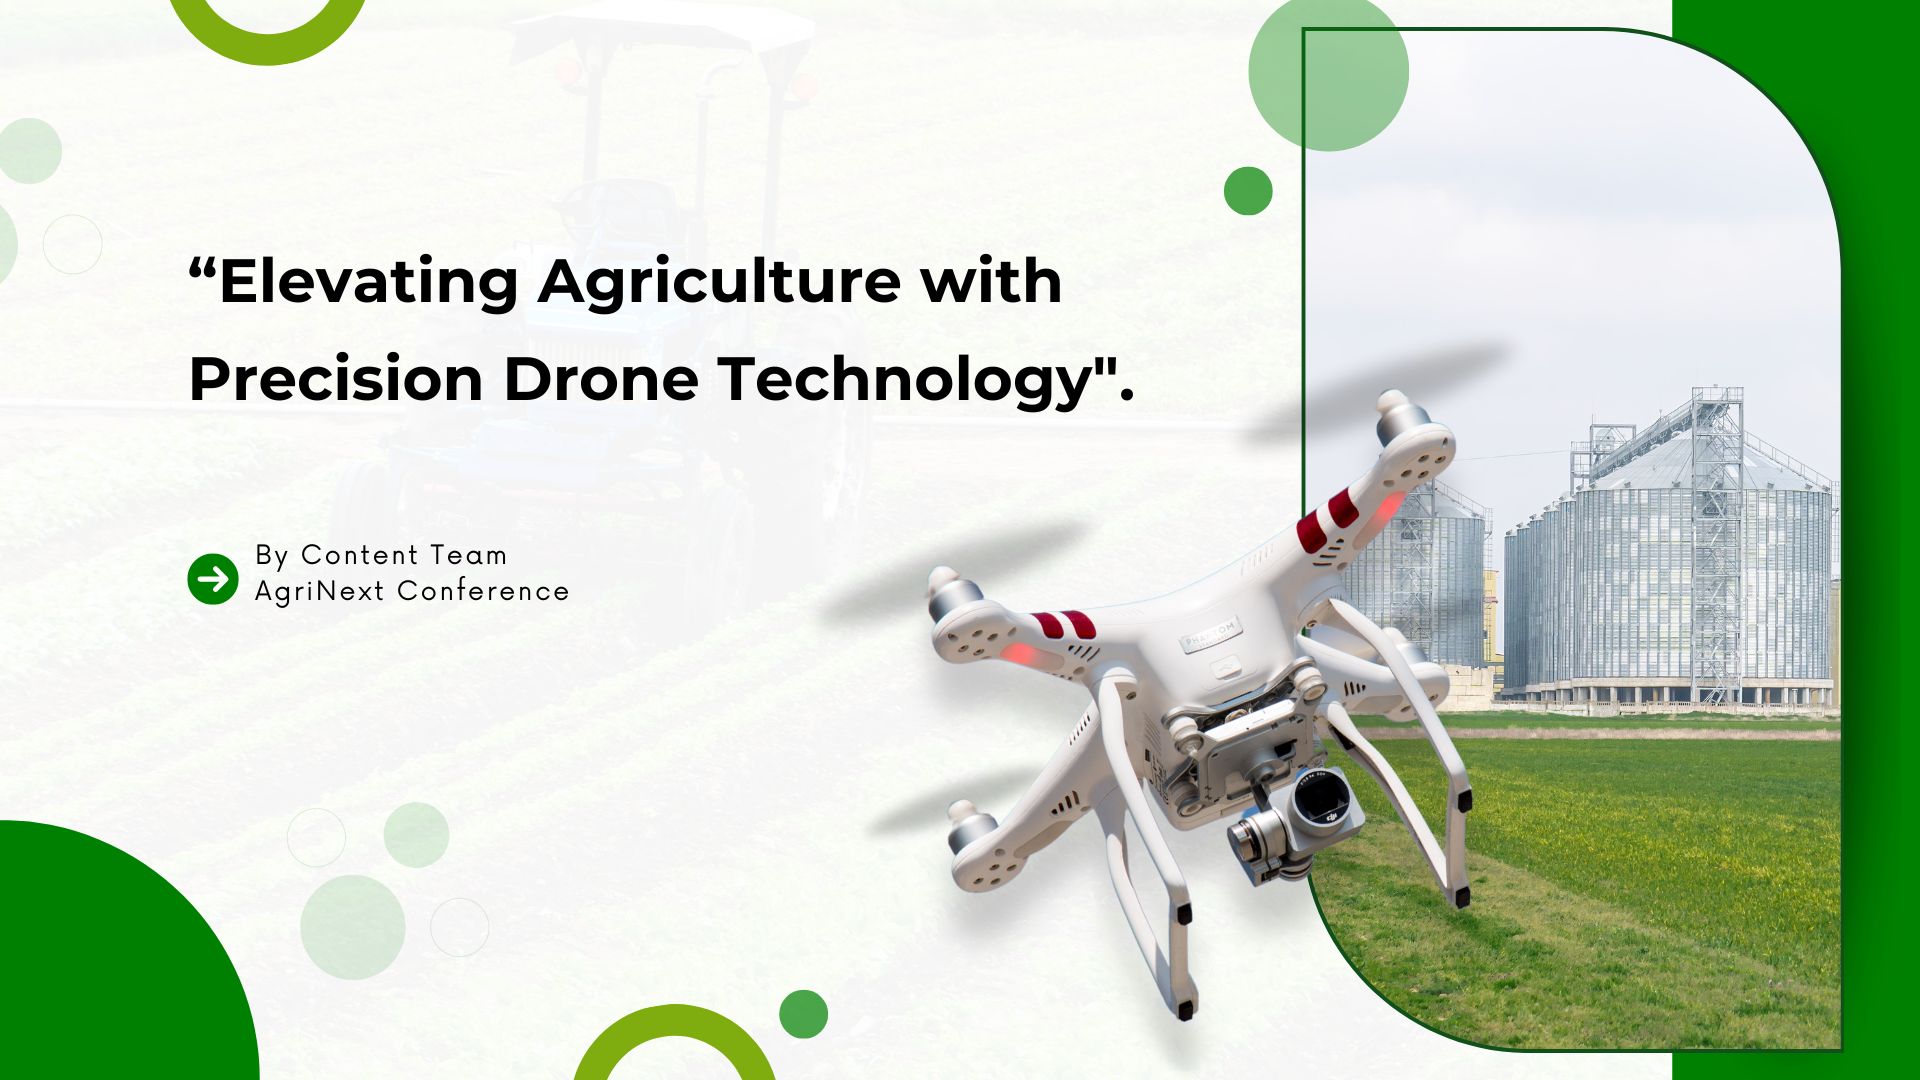 Elevating Agriculture with Precision Drone Technology.